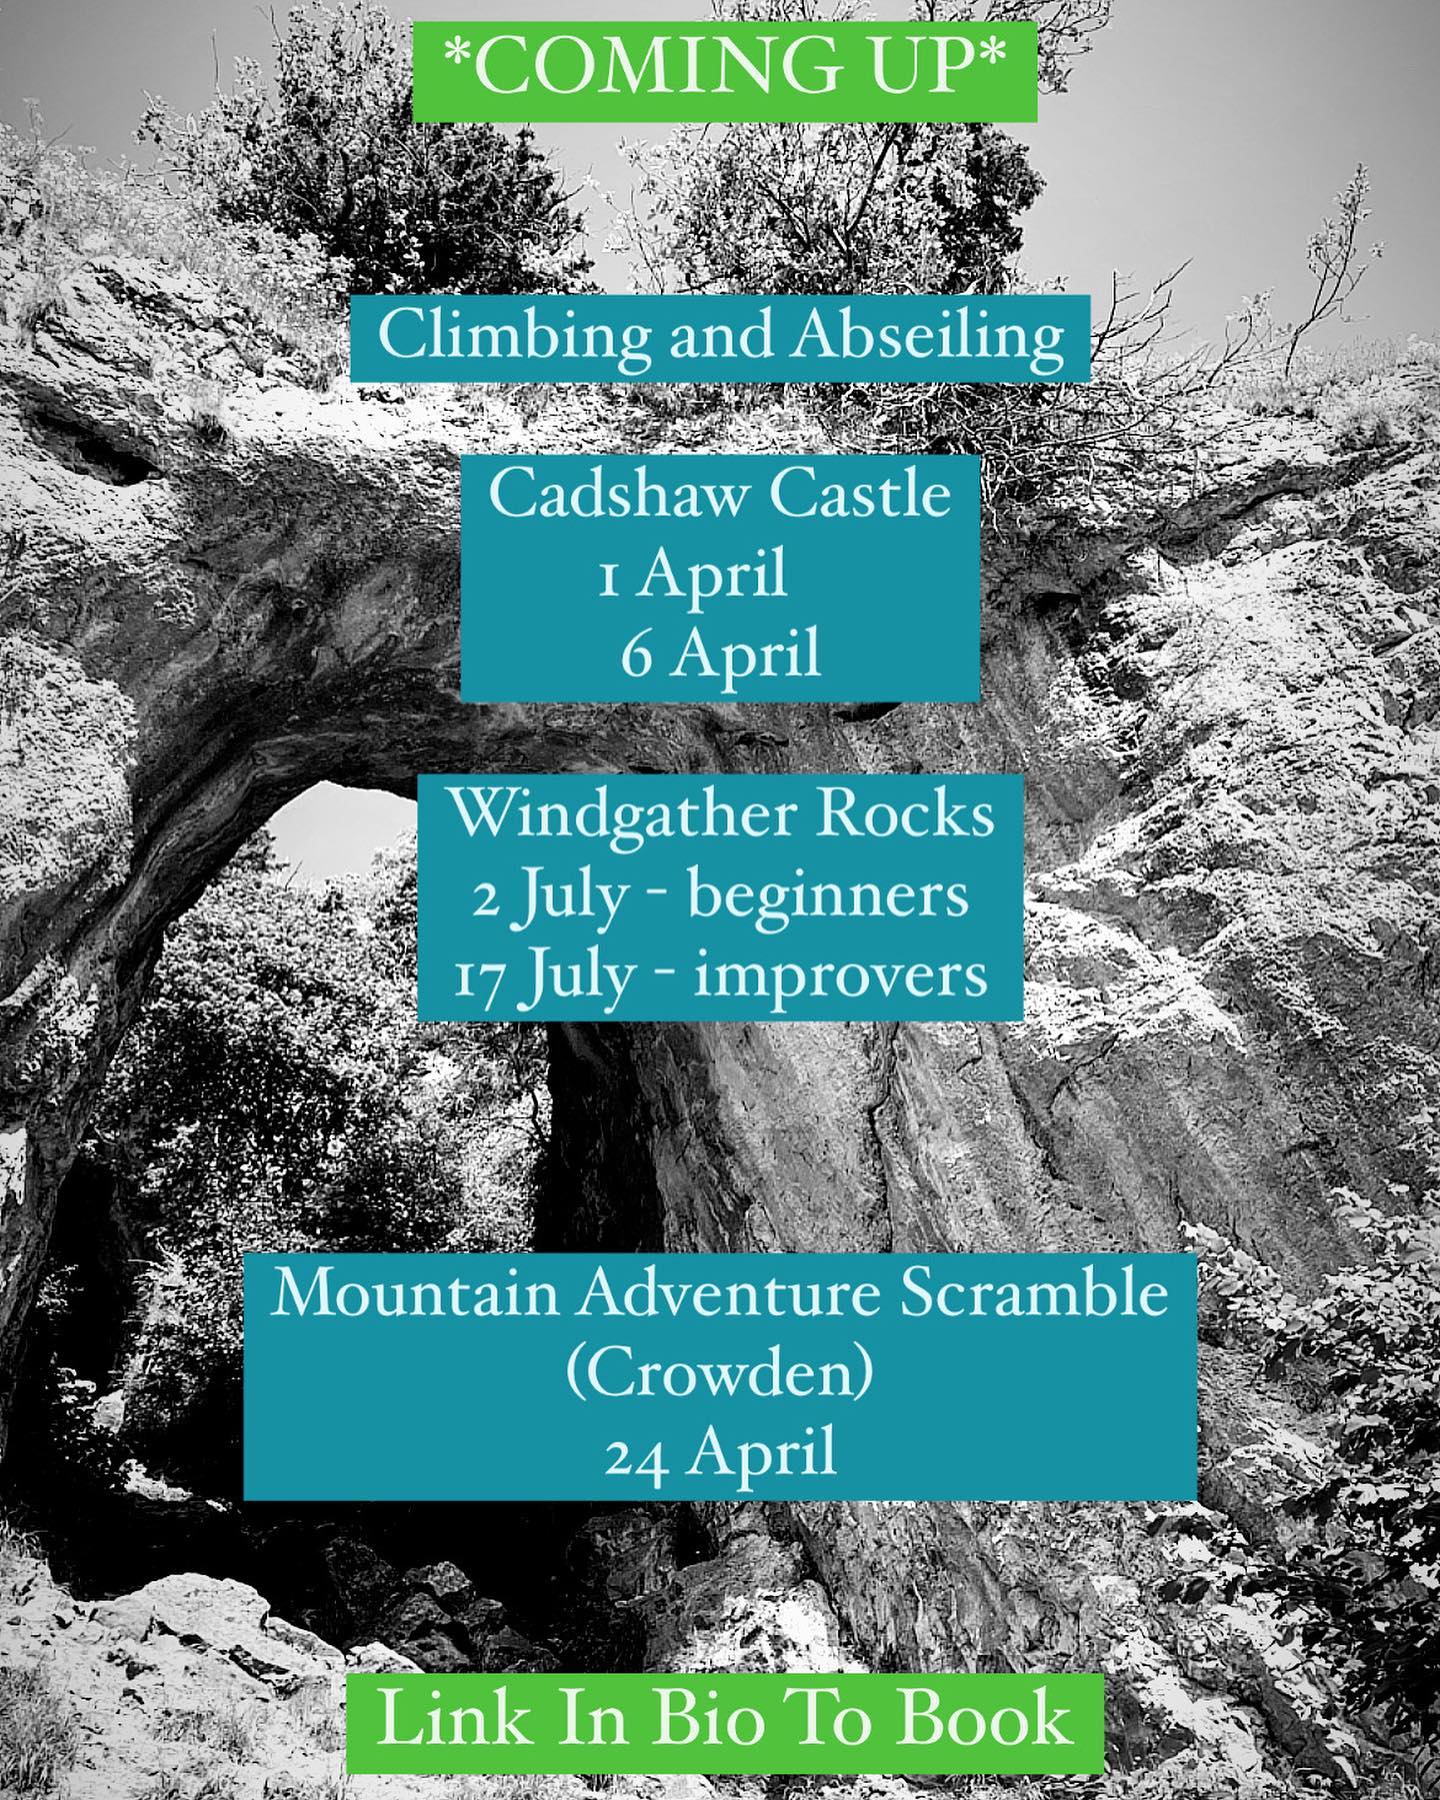 *COMING UP*

Join our friendly, qualified instructors for this session, just for fun or to learn some new skills, we hope to see you here!

More info and booking at www.wilderness-development.com, link in our bio 🧗‍♀️⛰🧗‍♀️
.
.
.
#wildernessdevelopment #smallbusiness #rockclimbing #climbing #scrambling #abseiling #trysomethingnew #peakdistrict #peakdistrictnationalpark #peakdistrictclimbing #mountainsfellsandhikes #roamtheuk #outdoorpursuits #outdooradventures #outdooractivities #nationalparksuk #booknow